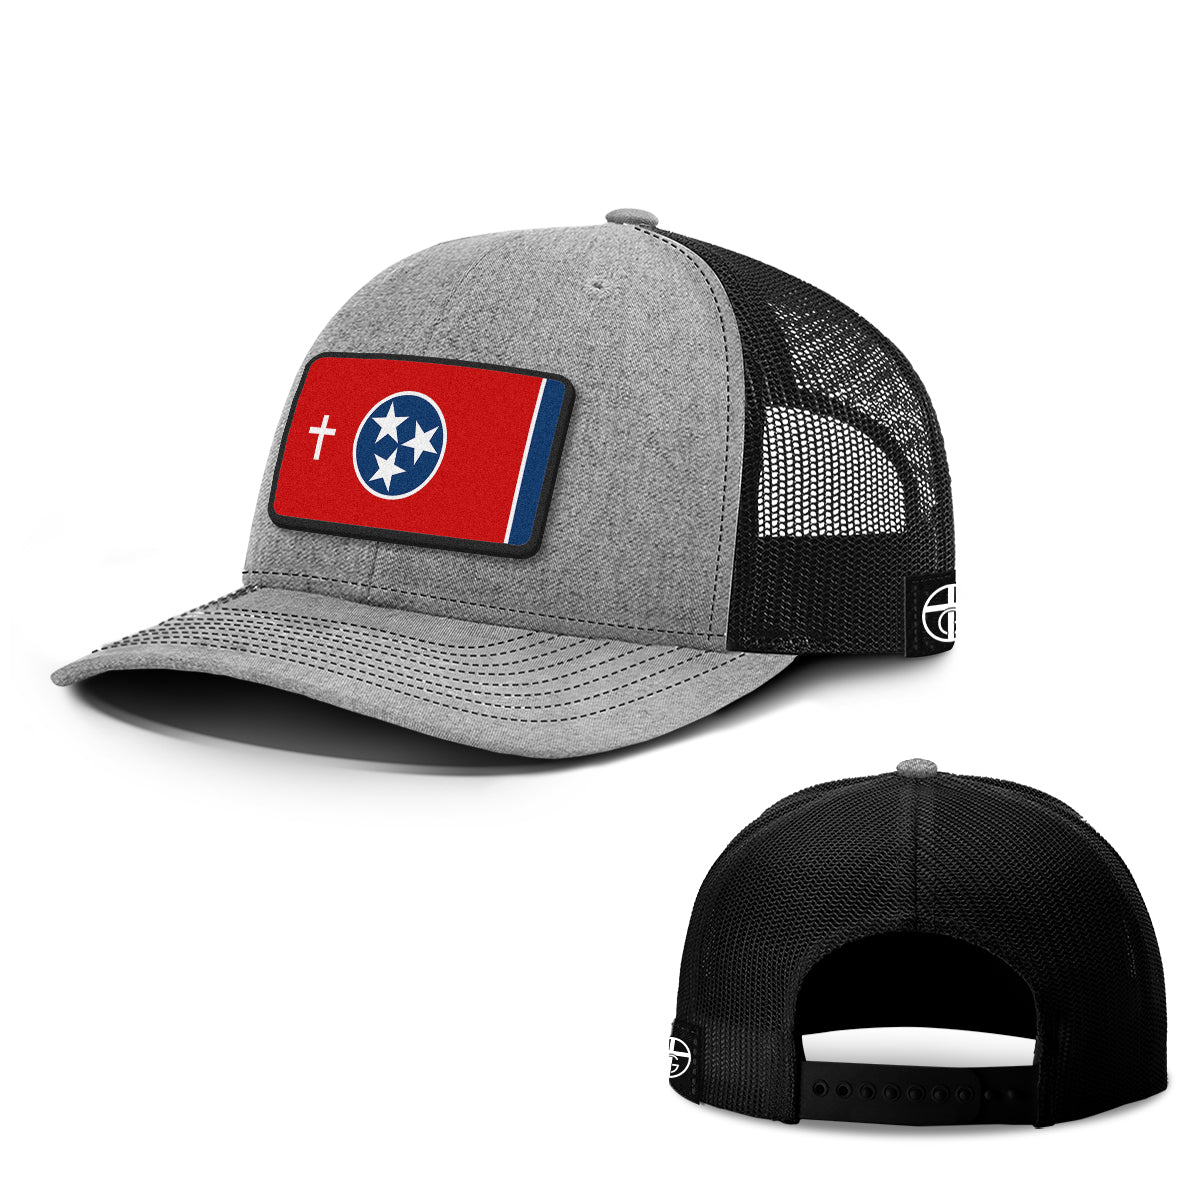 Tennessee is God’s Country Patch Hats